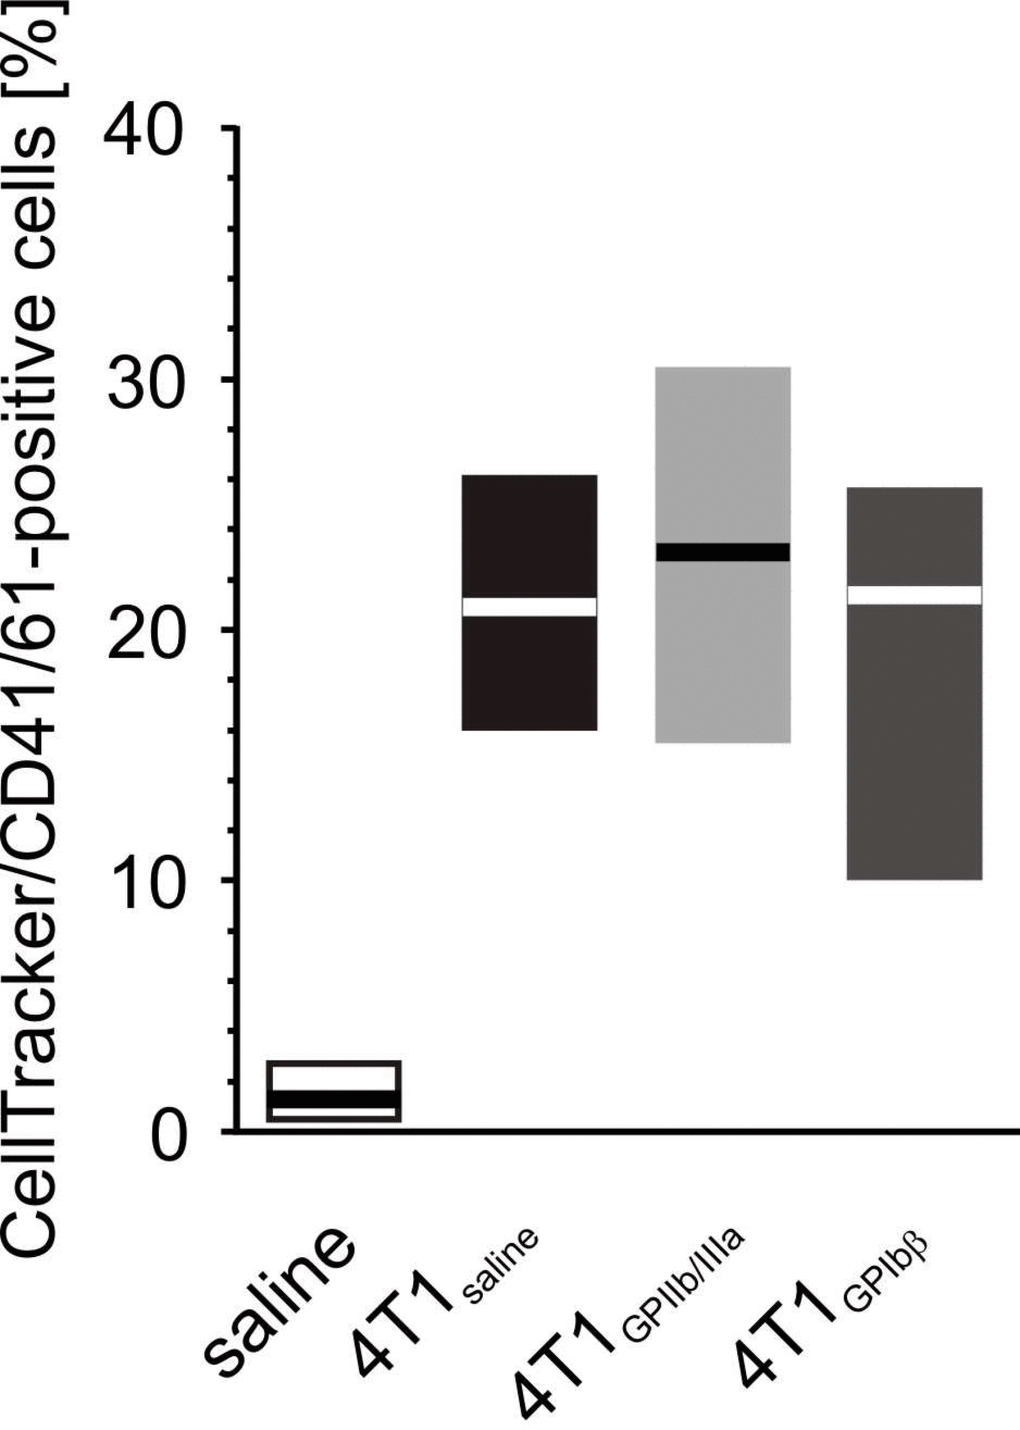 The effect of the inhibition of GPIIb/IIIa complex and GPIb on the formation of platelet-4T1 aggregates in washed blood samples. Results are presented as median (horizontal line) and interquartile range (box) (n = 8). Aliquots of washed blood, preincubated with blocking antibodies anti-GPIIb/IIIa (n = 8), anti-GPIbα or saline, were mixed with CellTracker-labeled 4T1 cancer cells or saline. Results are expressed as the percent fraction of CellTracker/CD41/61-positive cells (4T1-platelet aggregates). More experimental details are given in the Materials and methods section. The statistical significance of the differences, estimated with the Kruskal-Wallis’ test and the post hoc multiple comparisons Conover-Inman test, was: P1,α saline = 4T1GPIb = 4T1GPIIb/IIIa.